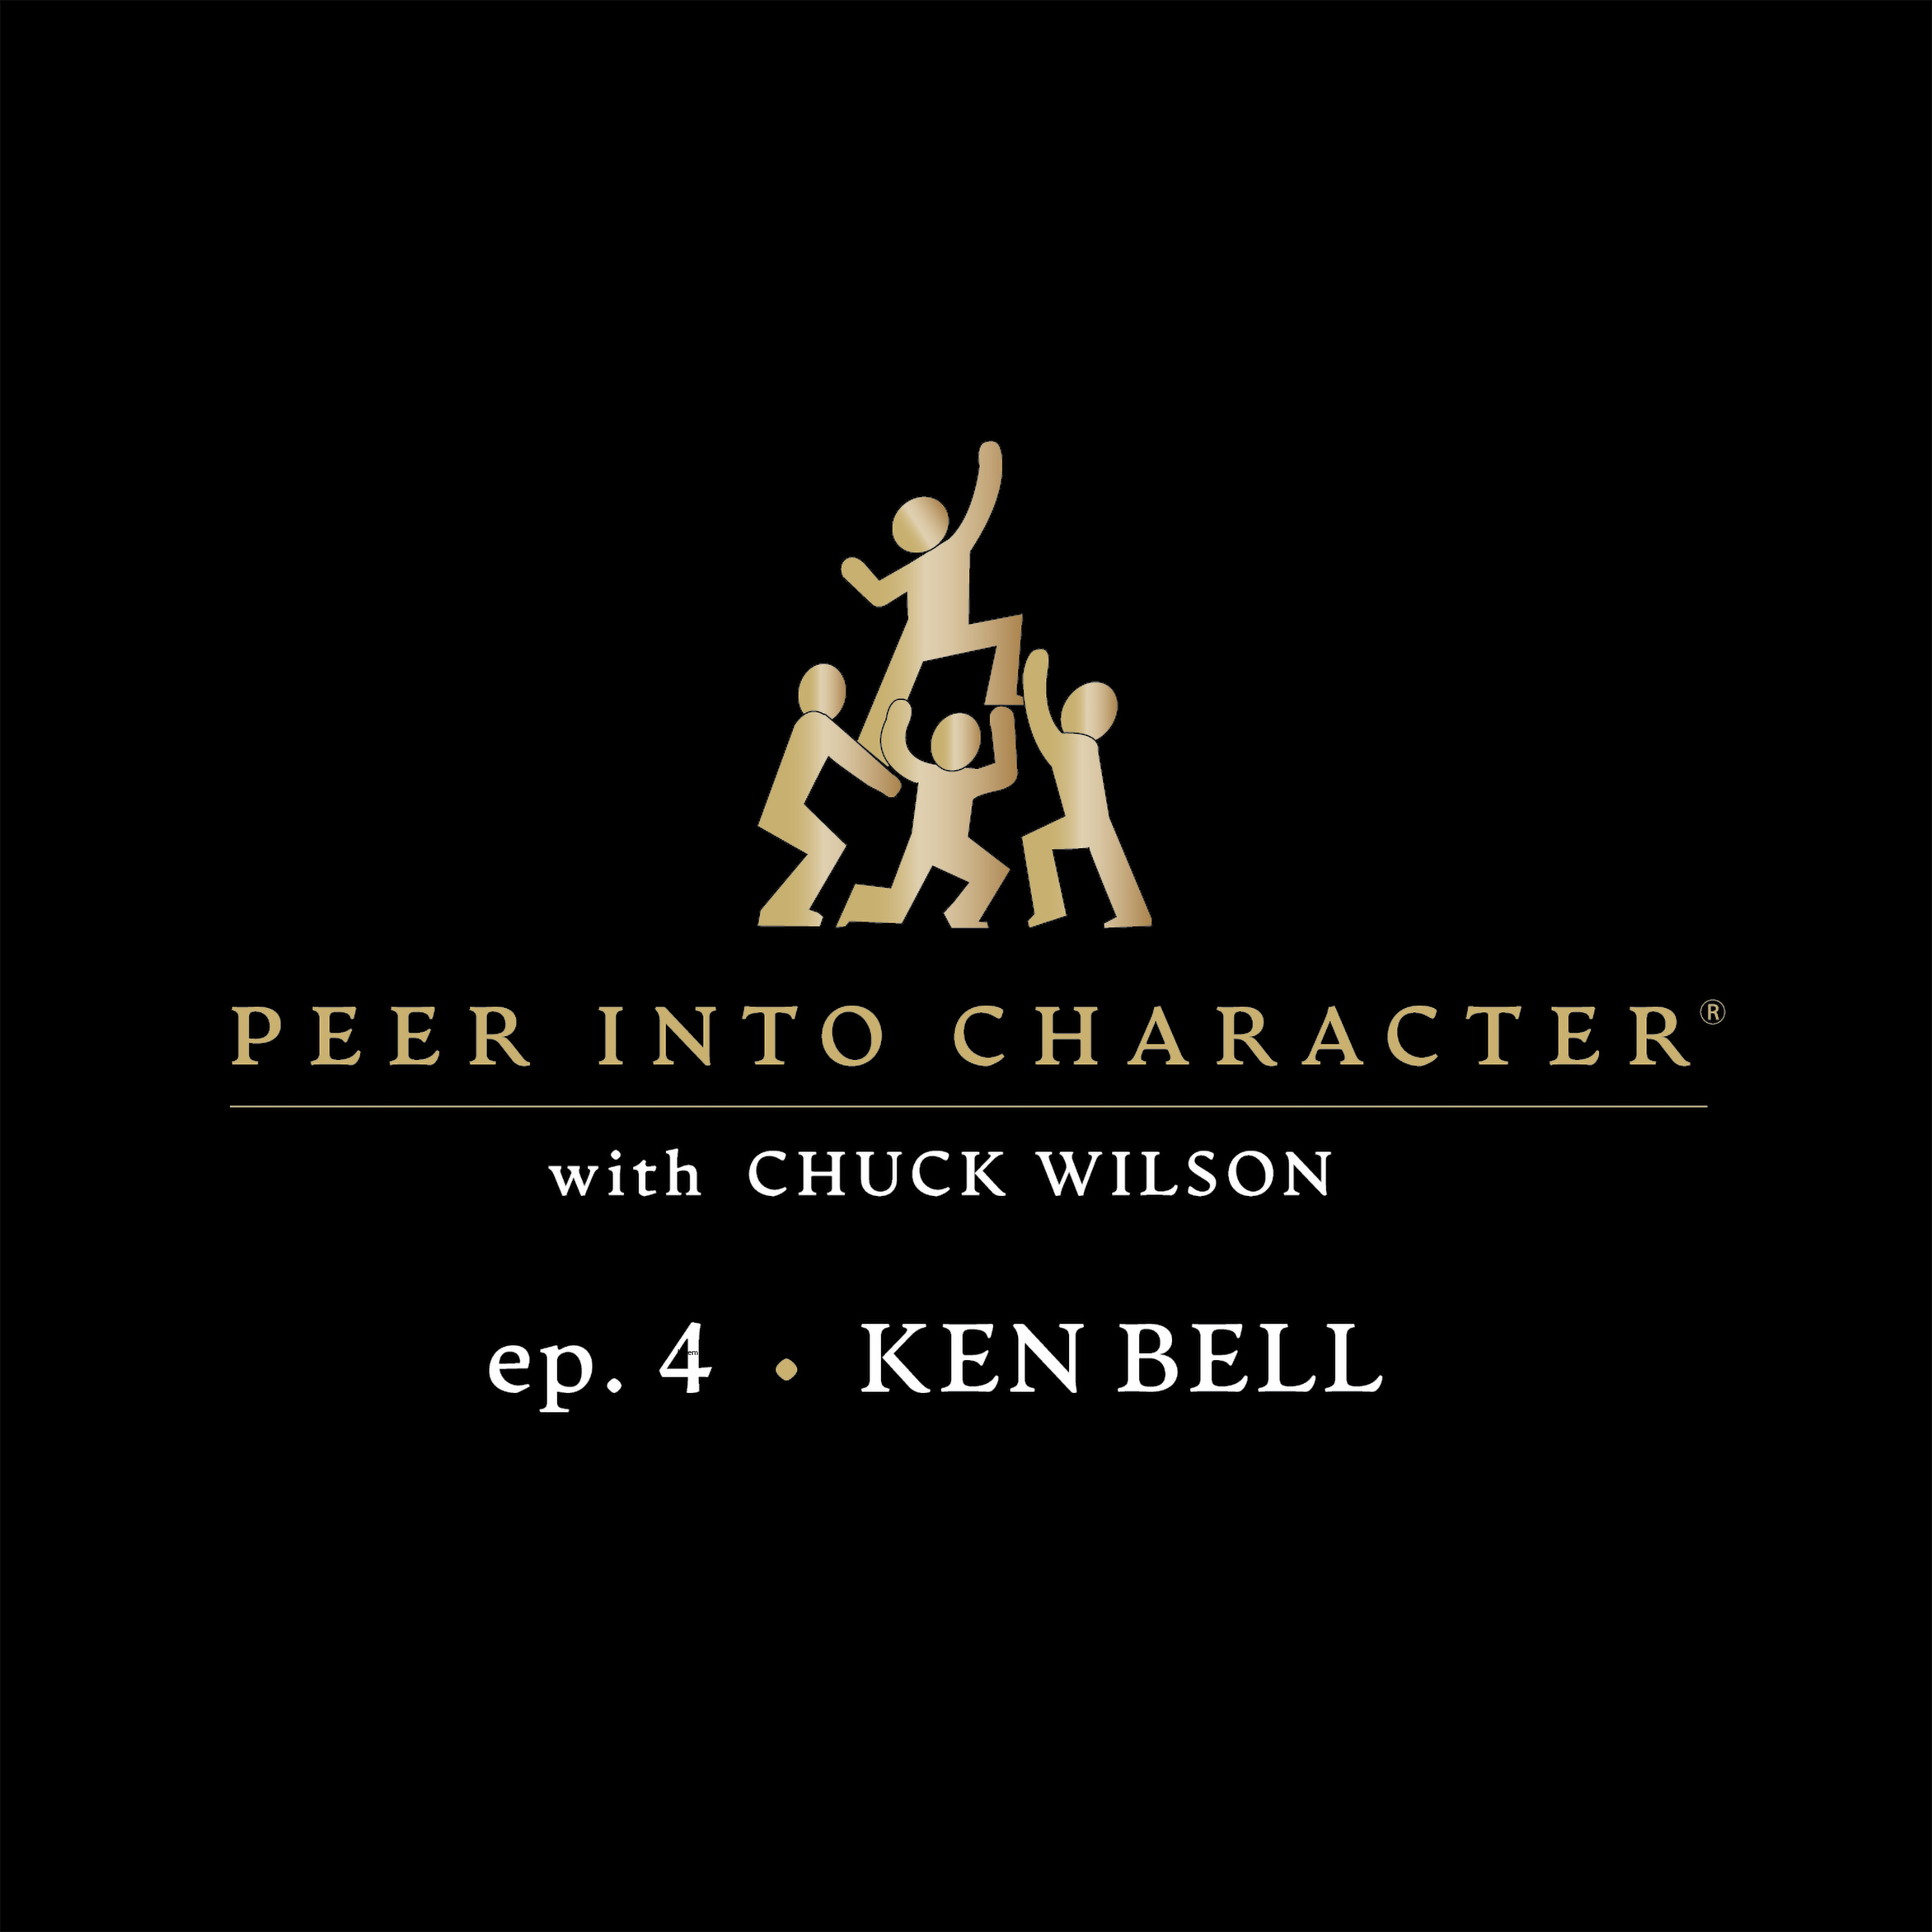 ep. 4: Ken Bell on The Mindset to Overcome Challenges